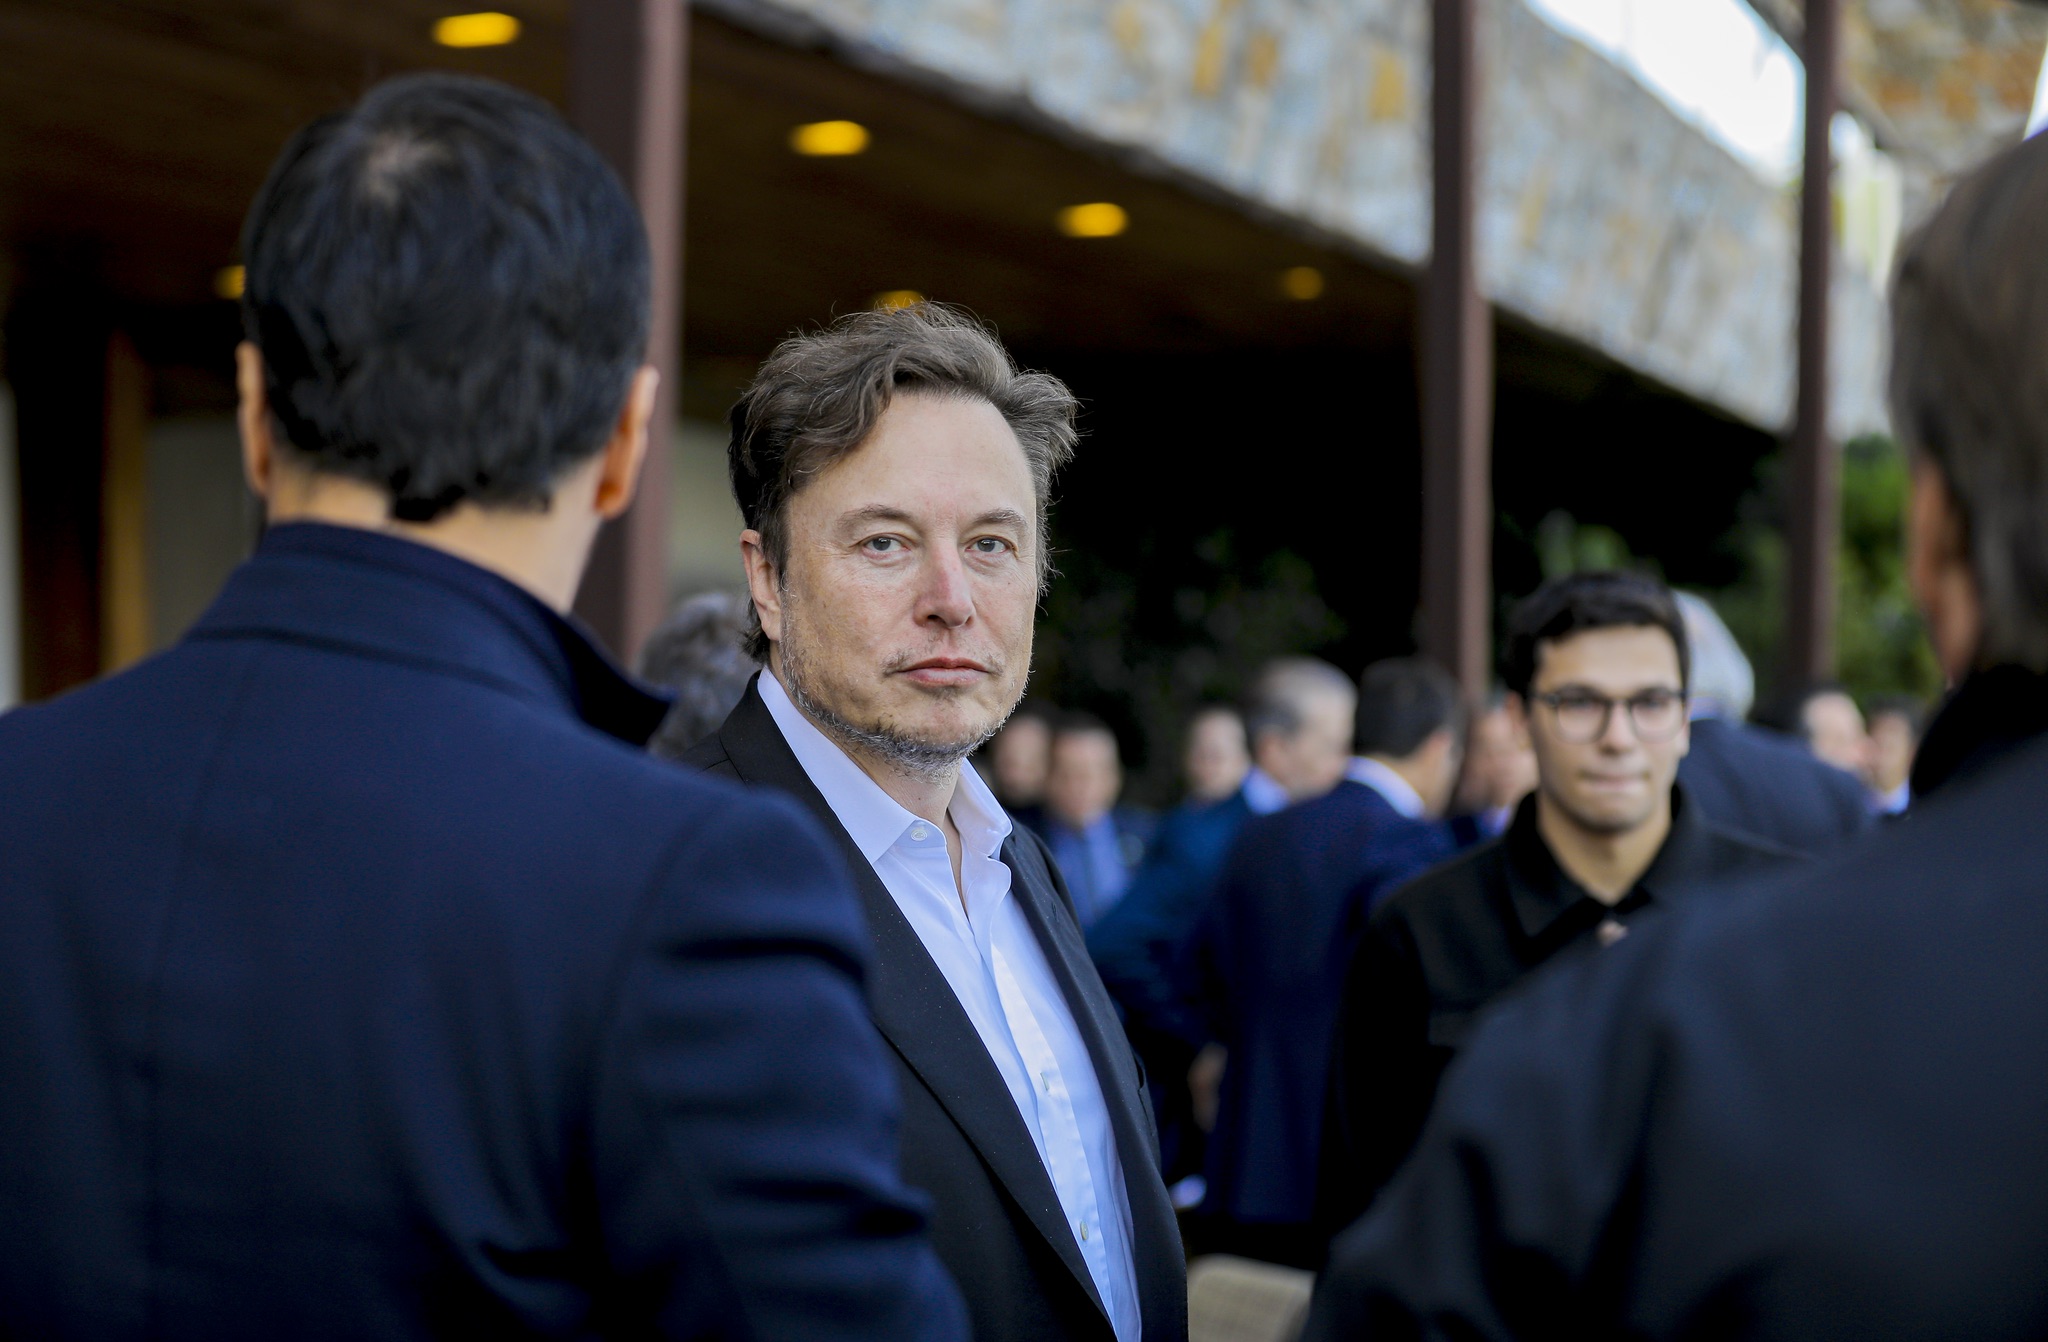 Elon Musk loses crown as Forbes richest person